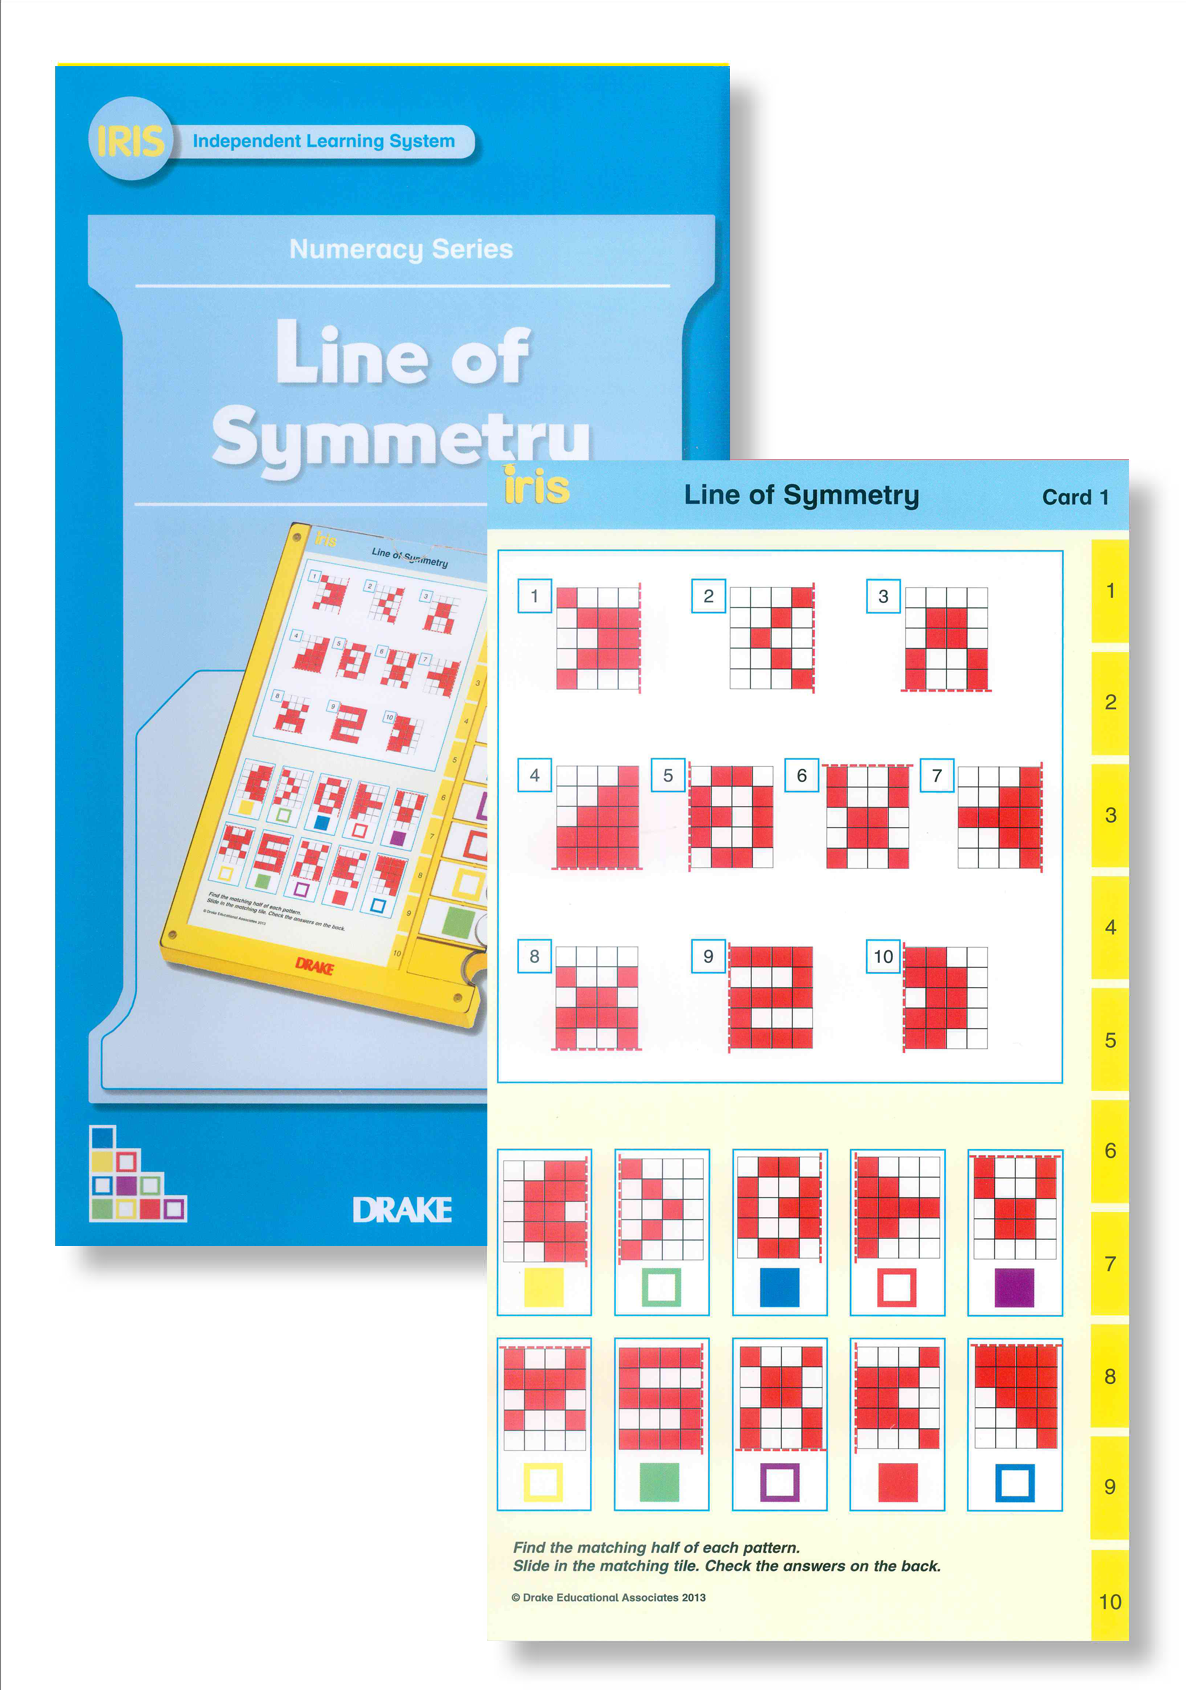 Iris Study Cards: Early Numeracy Year 3 - Line of Symmetry